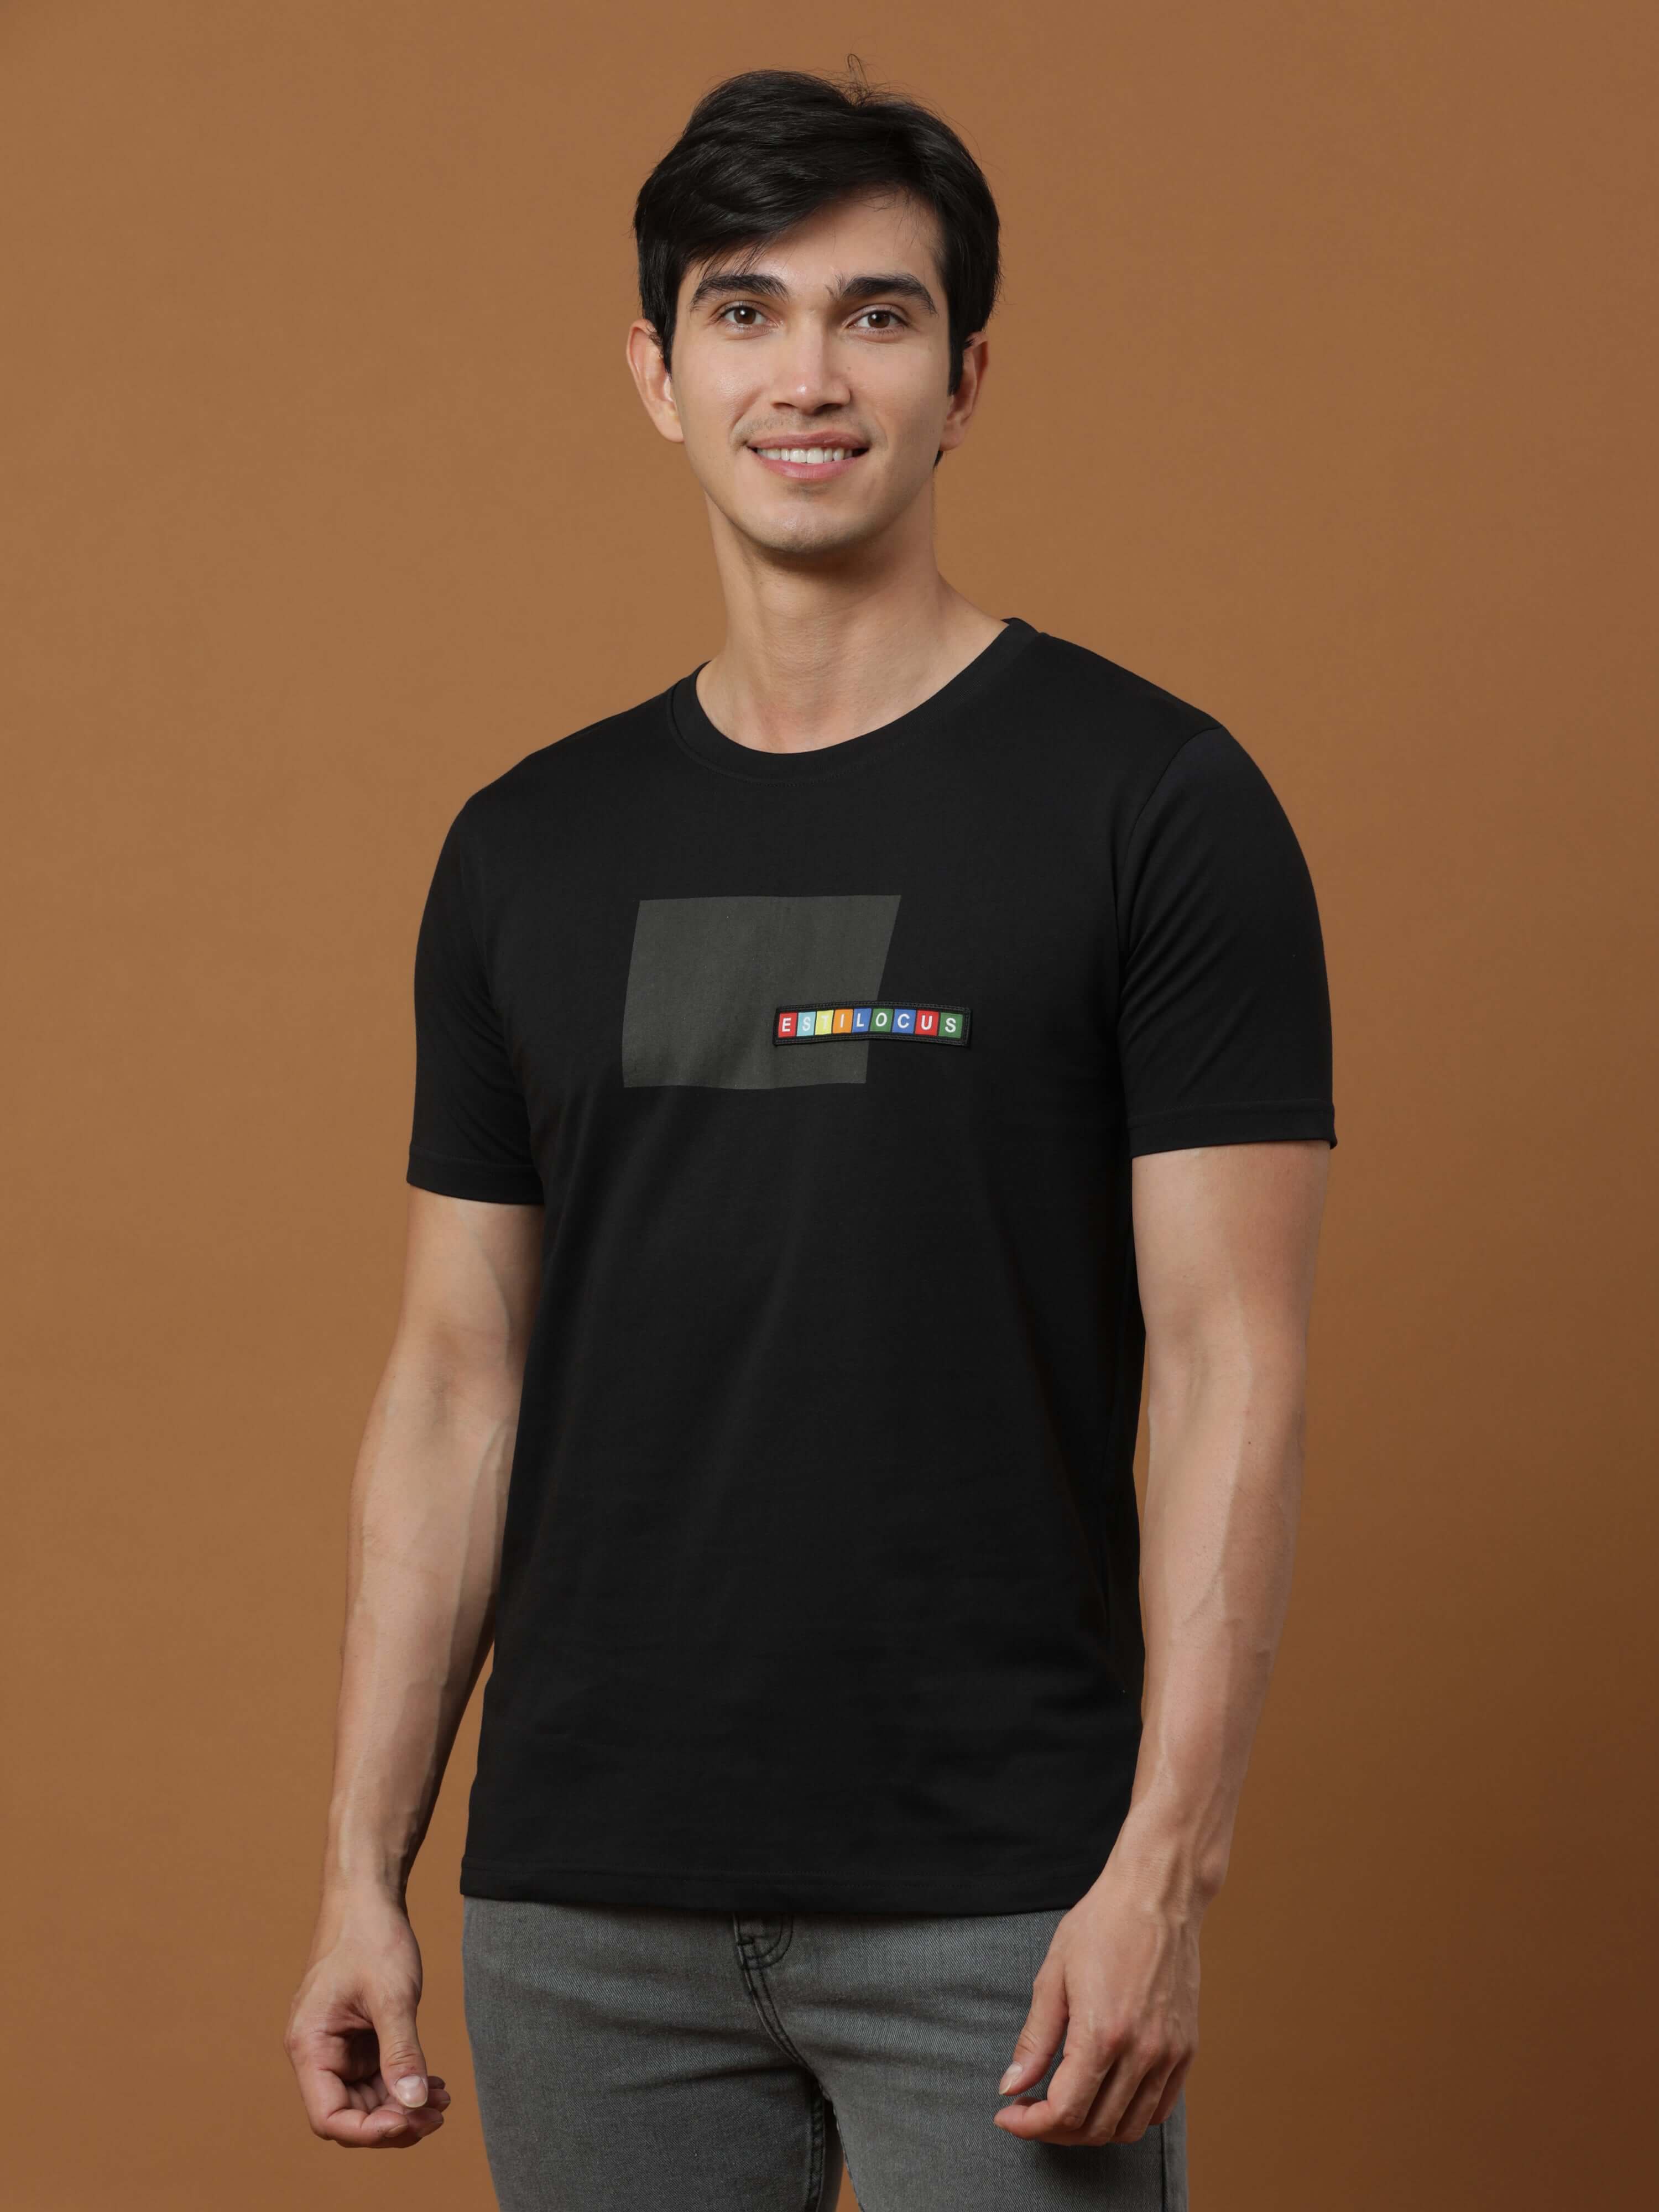 Estilocus Black Crew Neck Printed T Shirt shop online at Estilocus. 100% Cotton Designed and printed on knitted fabric. The fabric is stretchy and lightweight, with a soft skin feel and no wrinkles. Crew neck collar which is smooth on the neck and keeps y